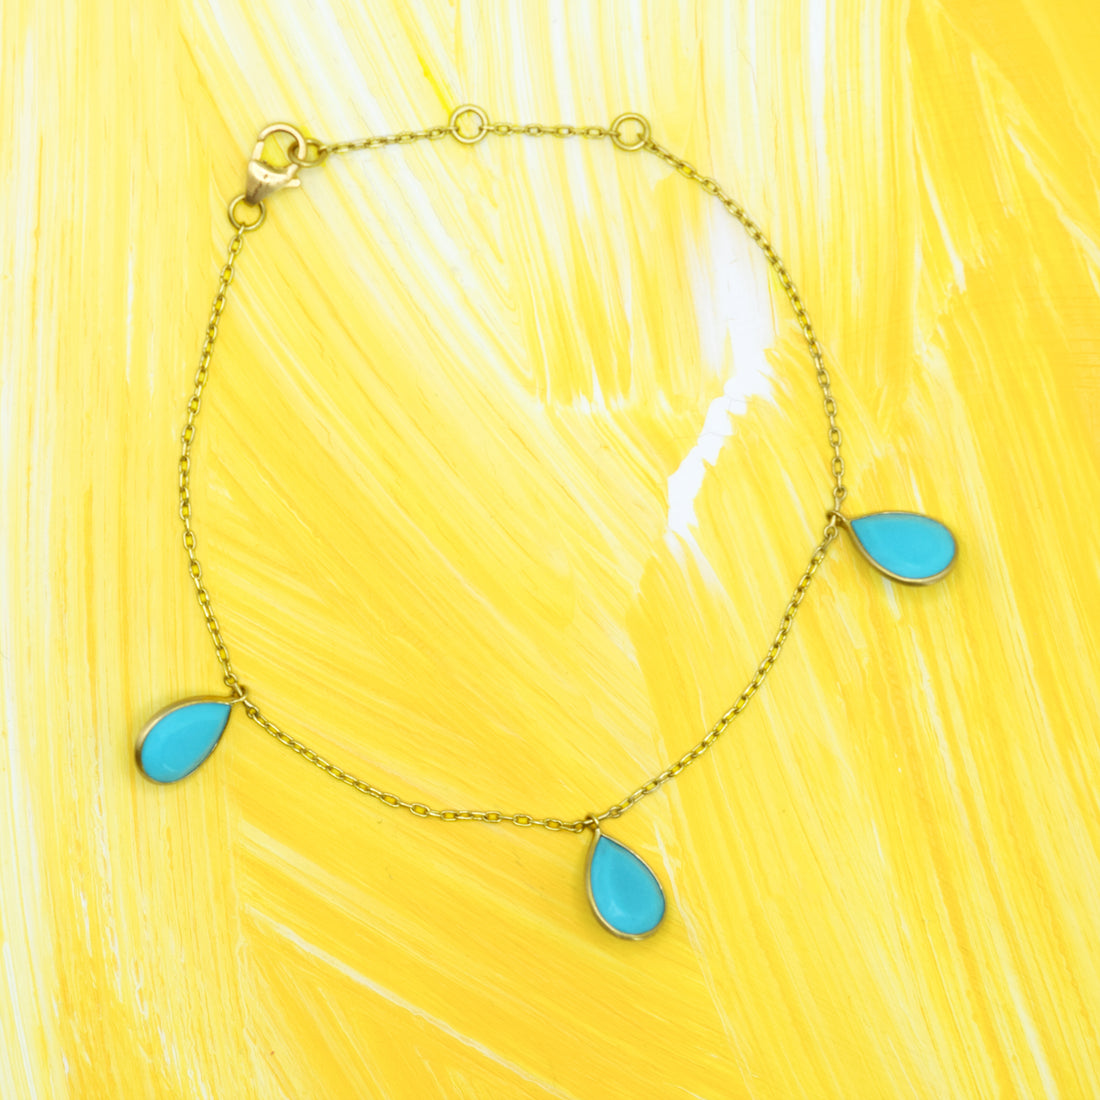 Kothari Gold Chain Bracelet with Three Turquoise "Petals"